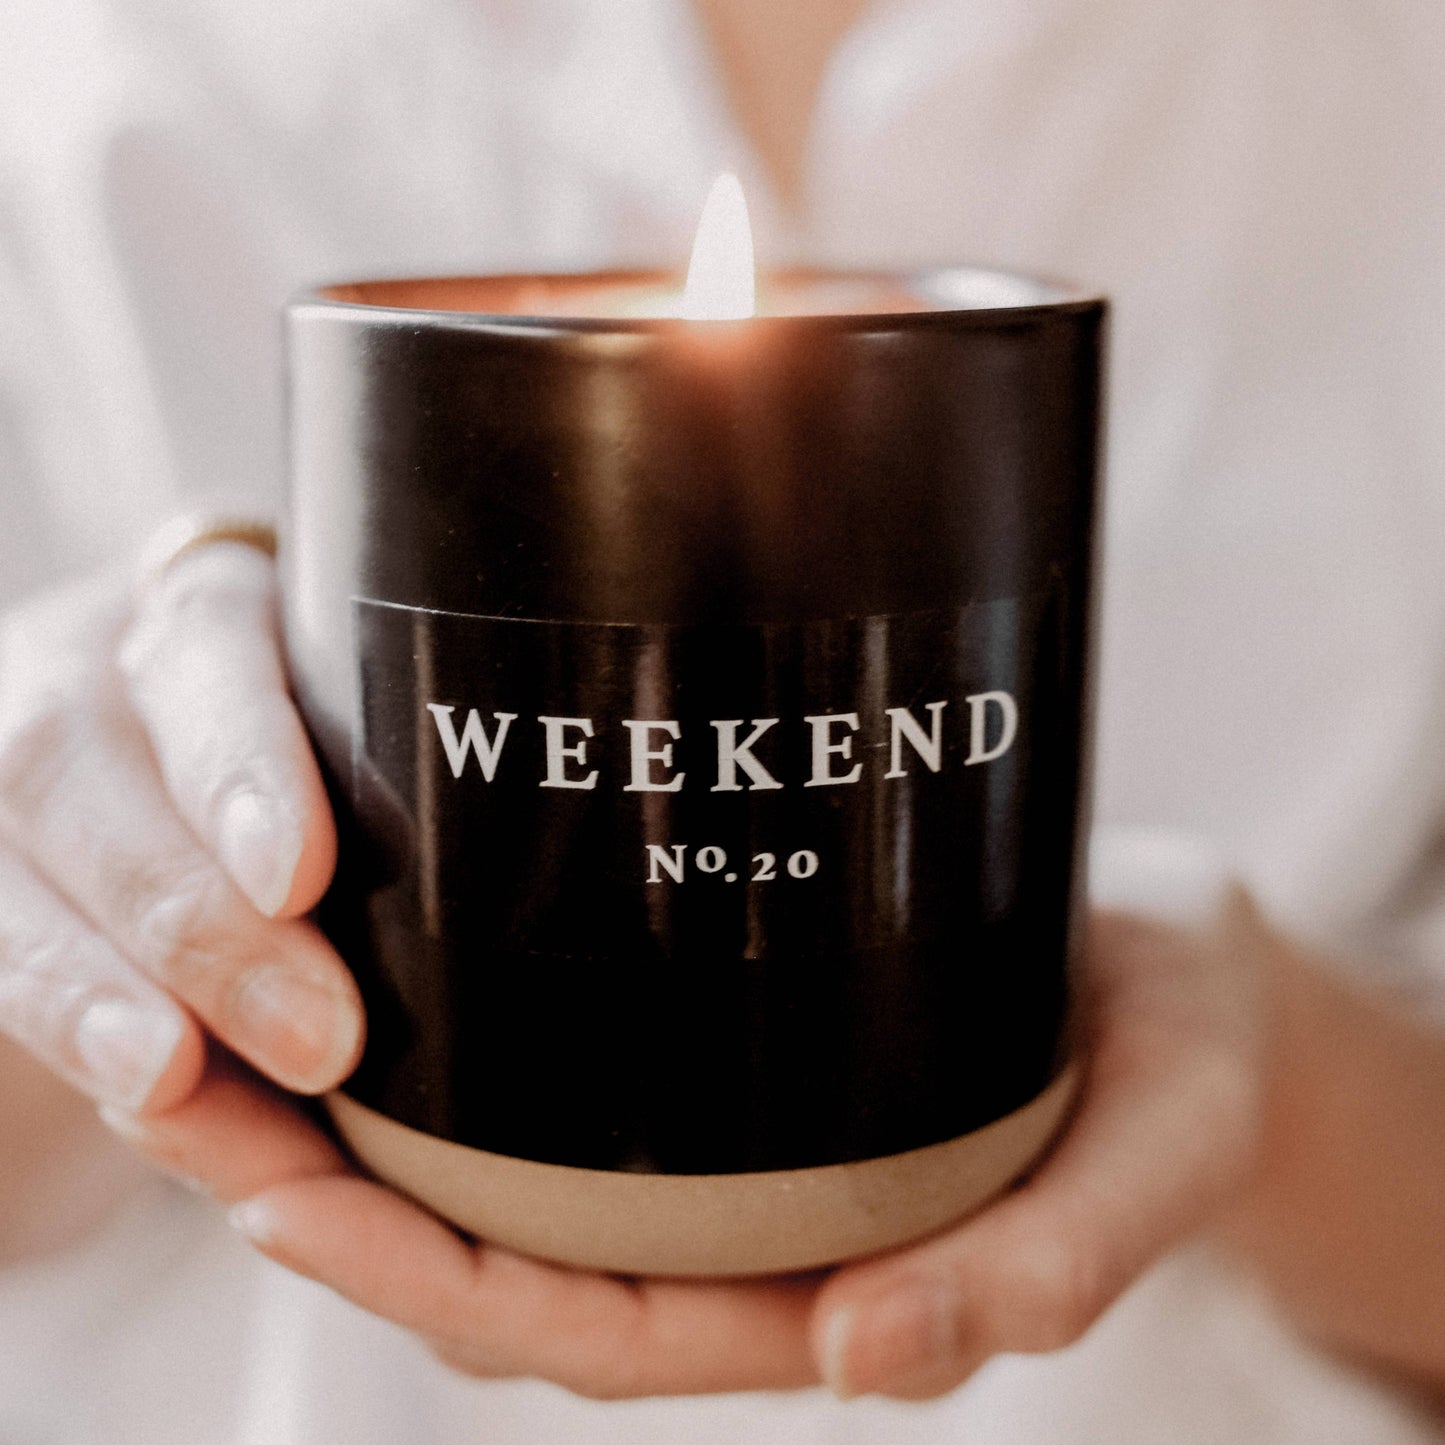 Weekend 12 oz Soy Candle - Home Decor & Gifts